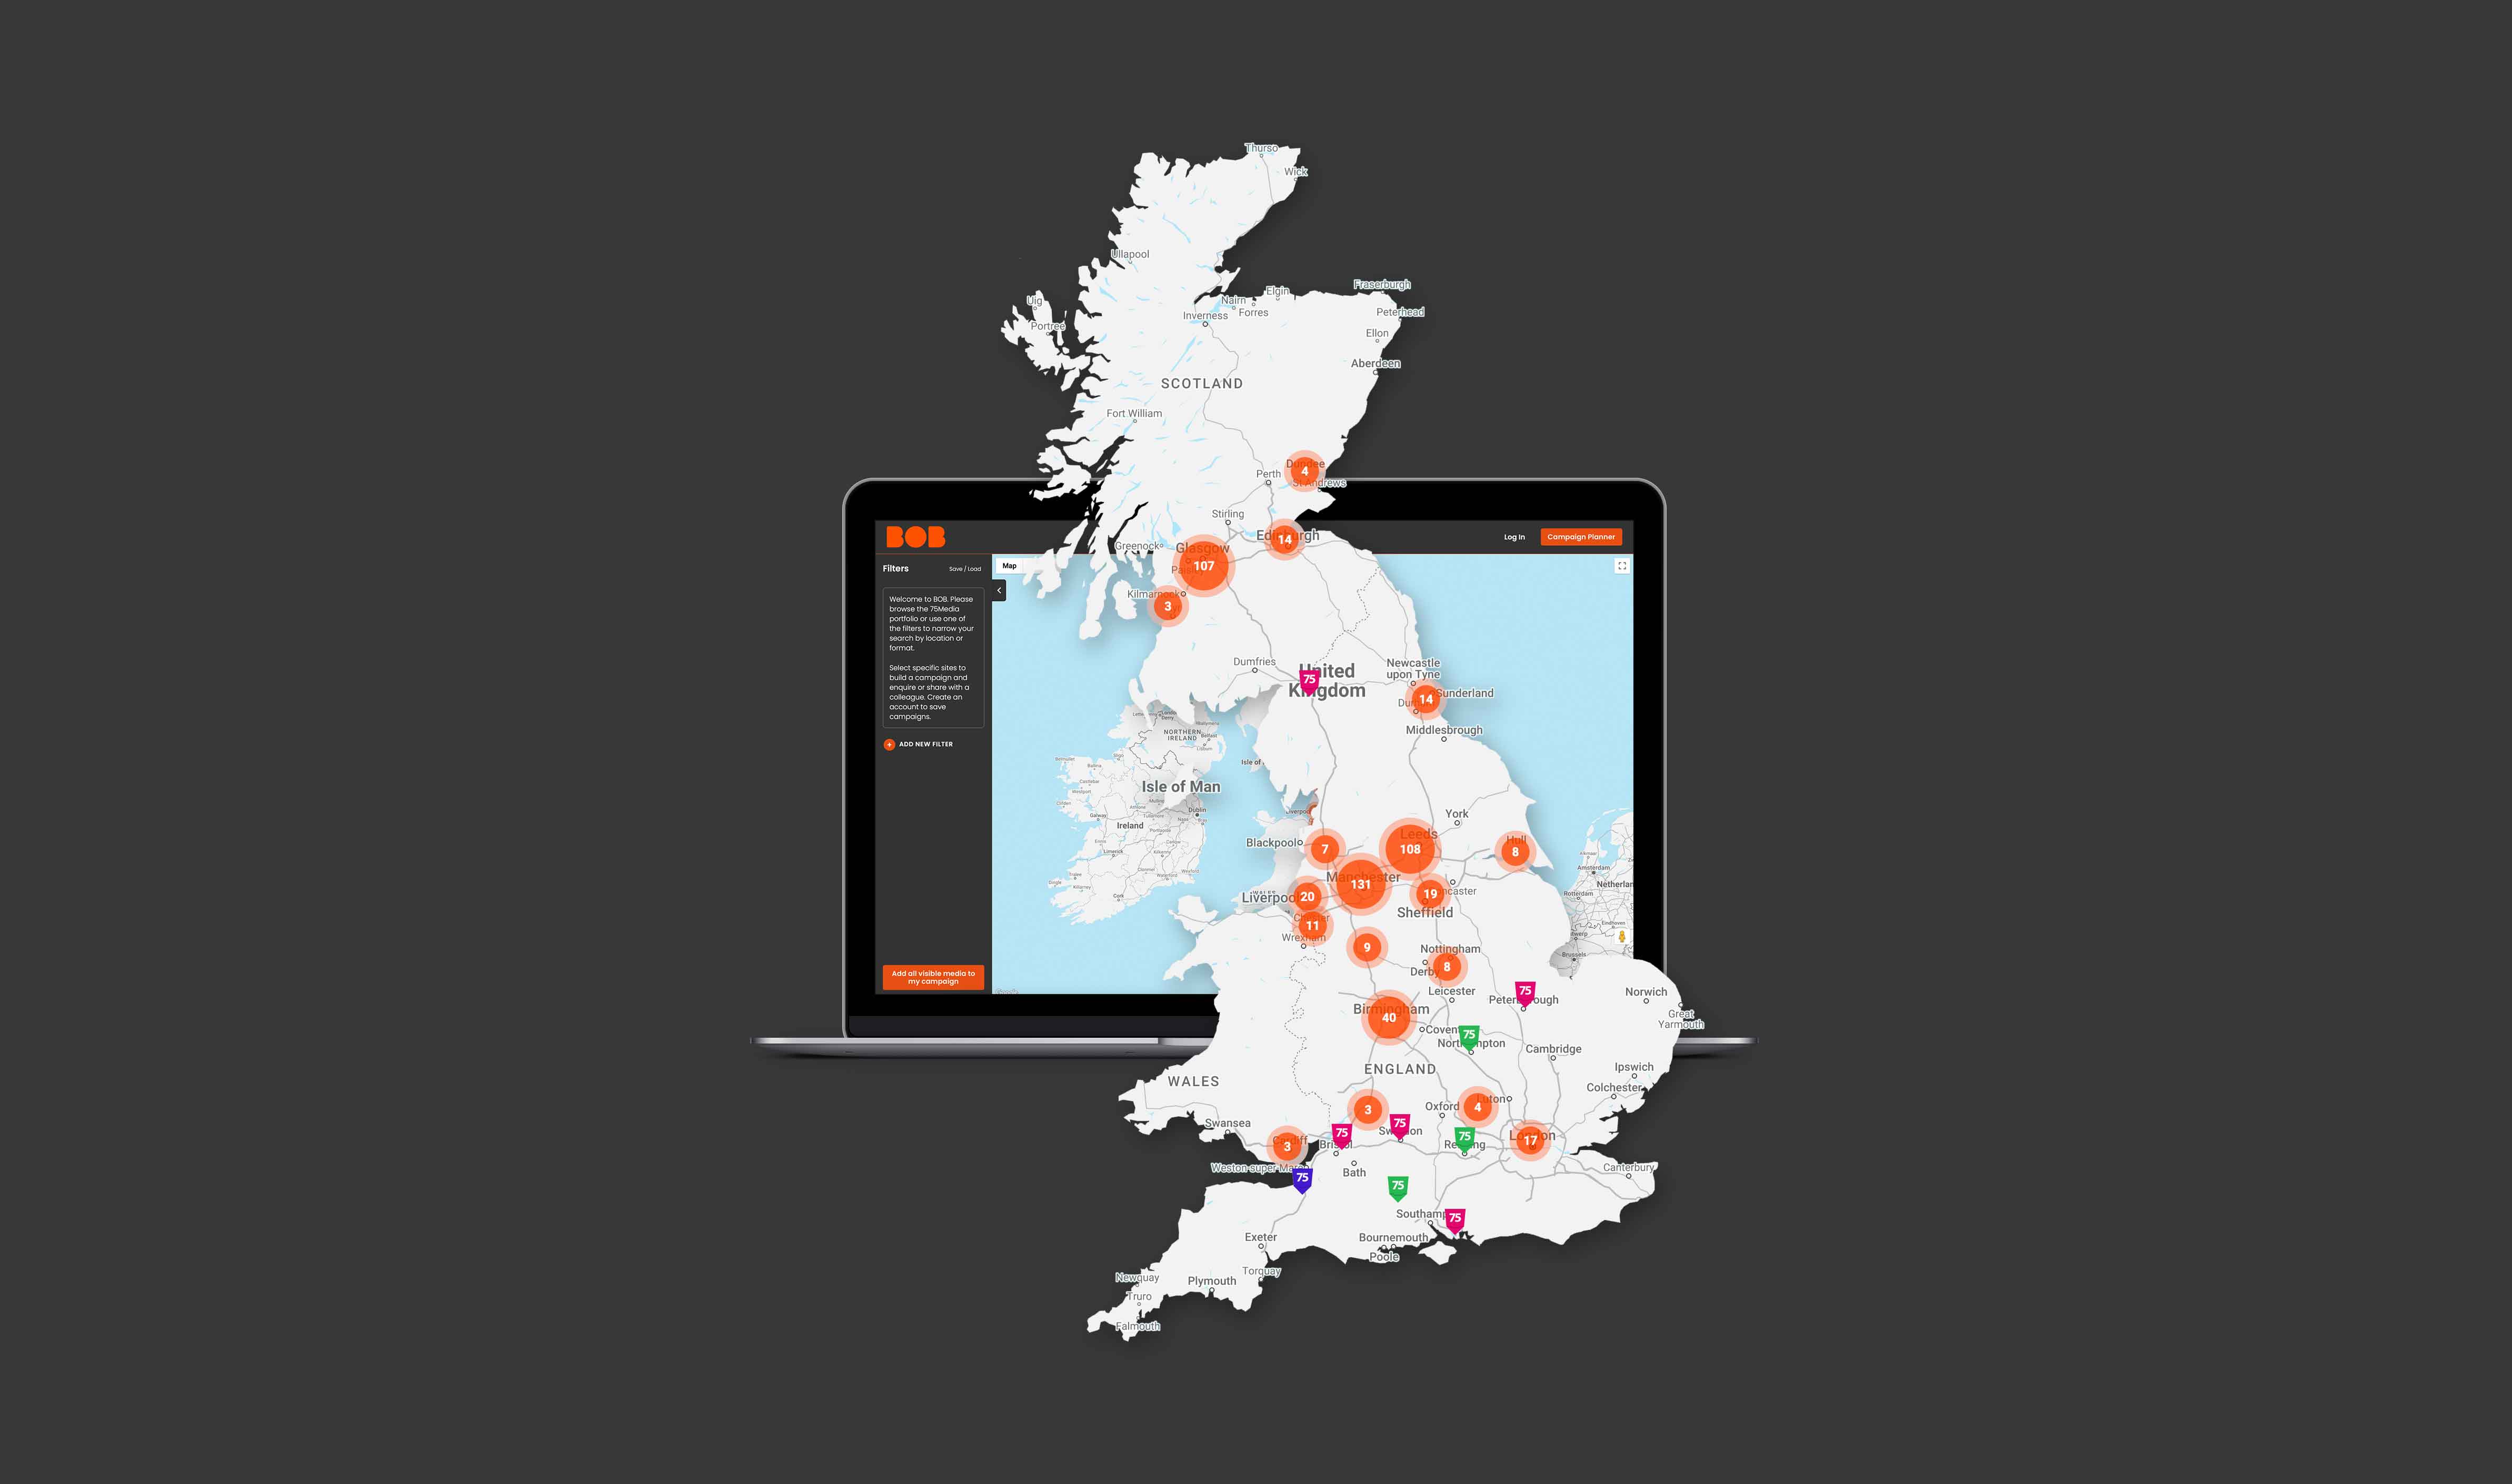 UK out-of-home (OOH) media owner 75Media has launched a proprietary piece of planning software